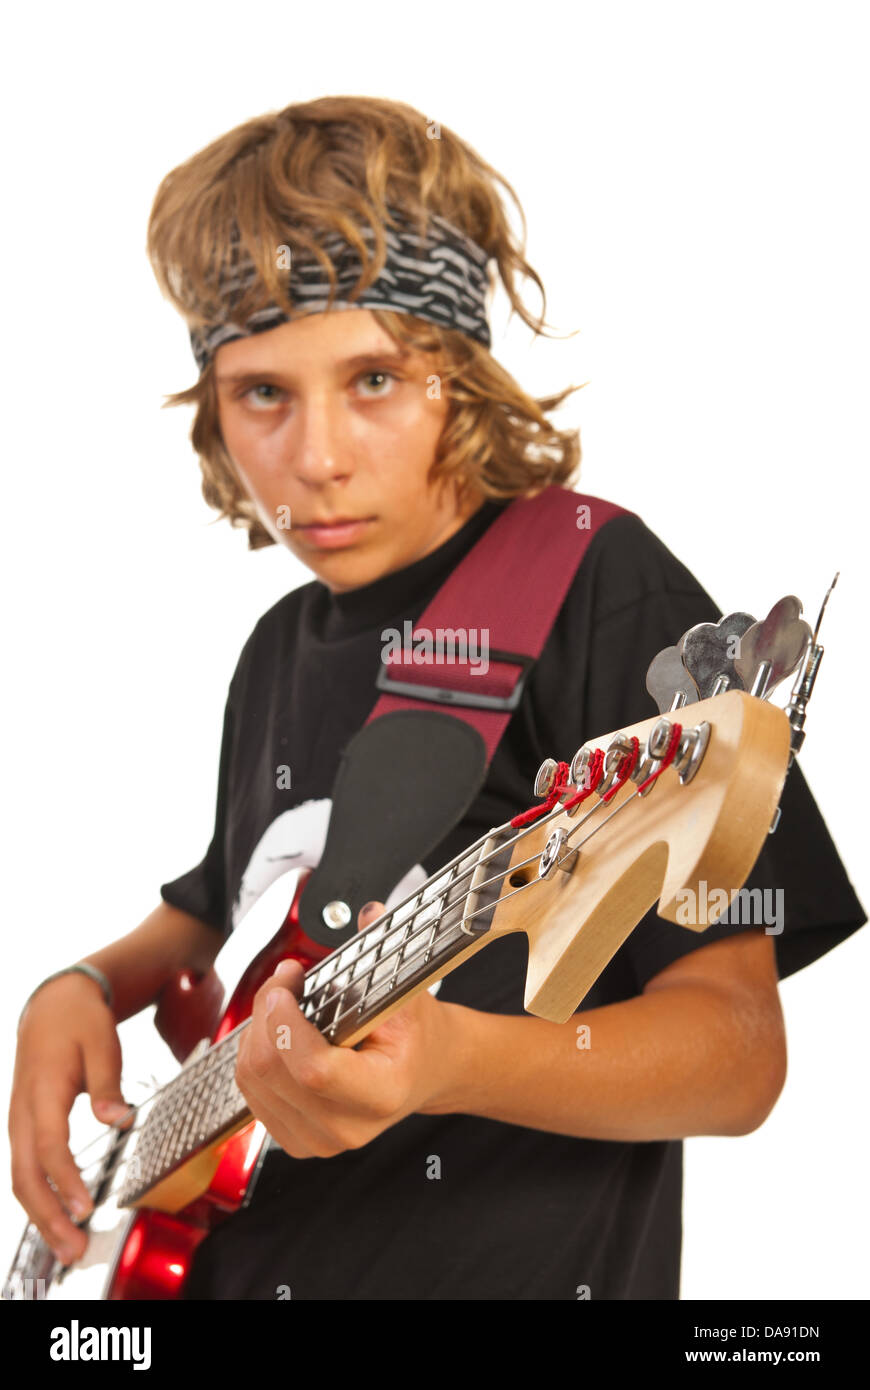 Teen boy playing bass guitar isolated on white background Stock Photo